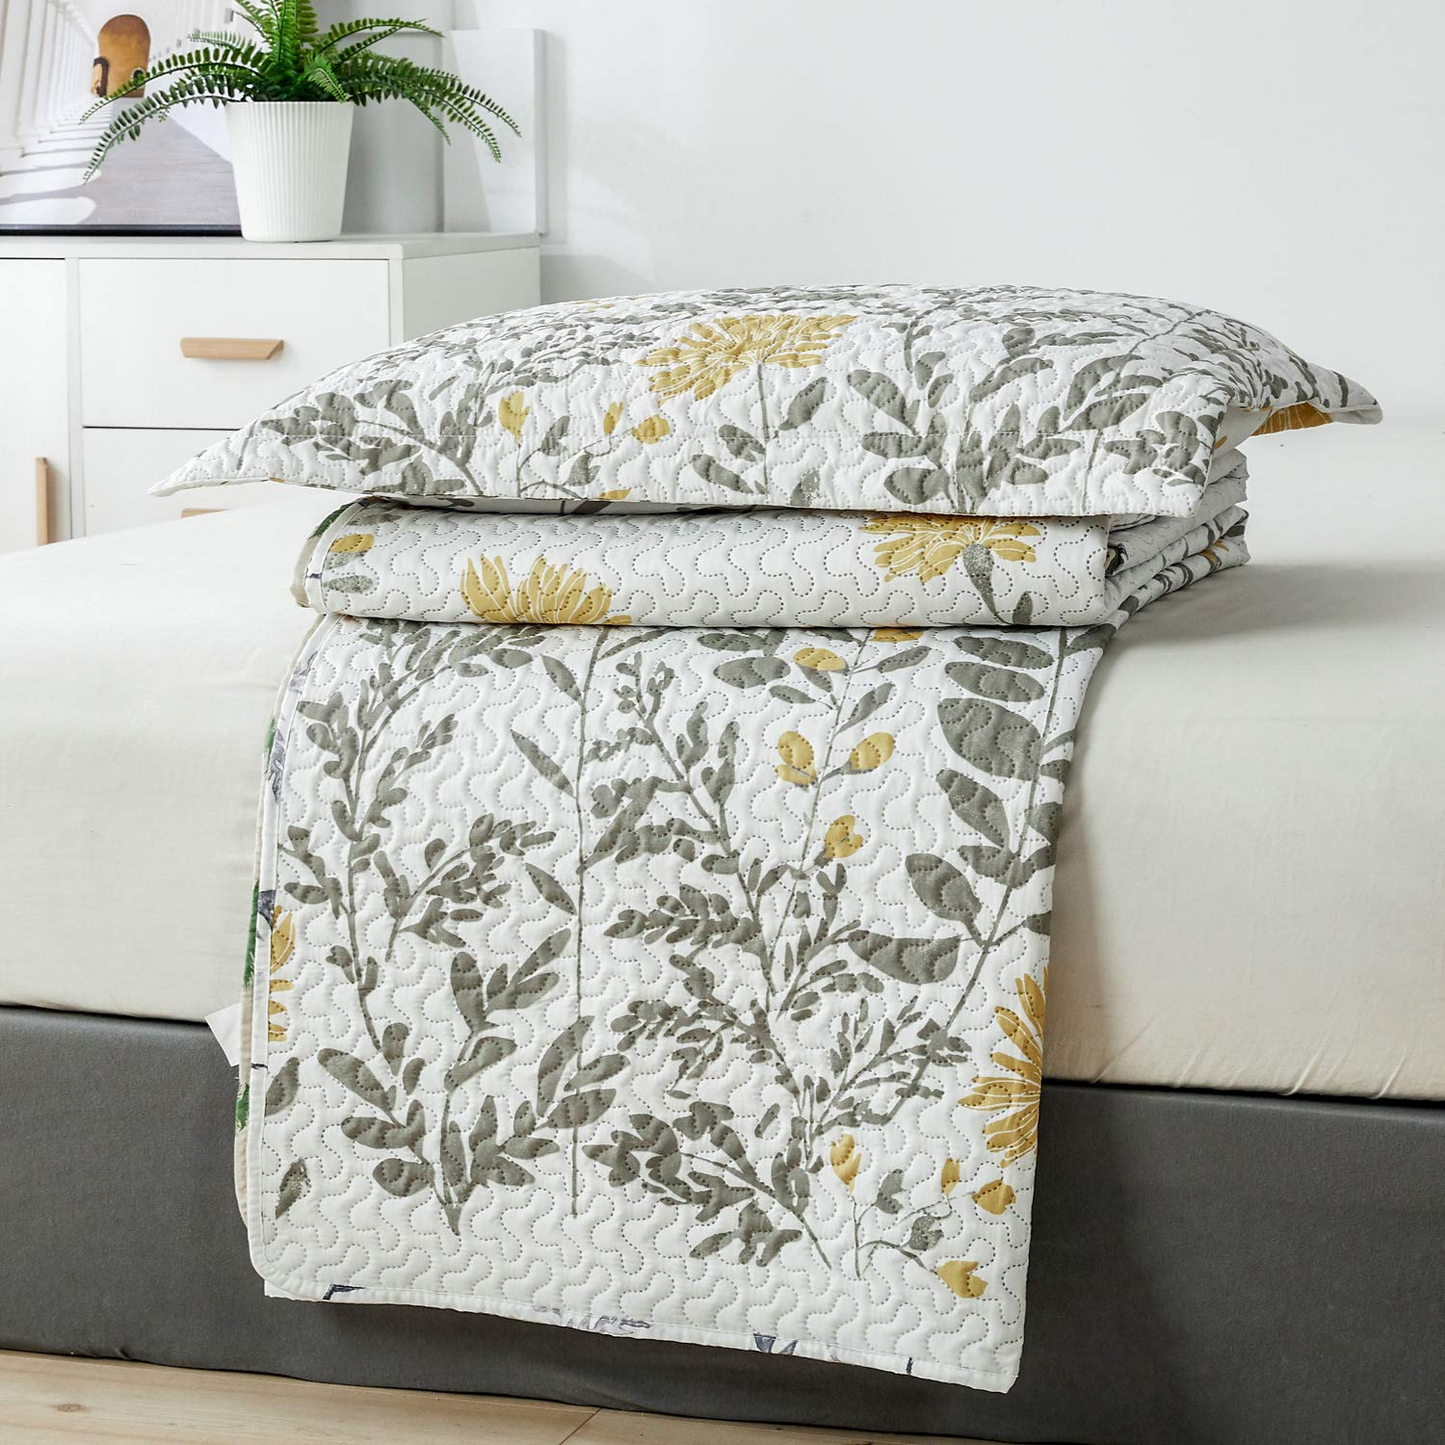 Yellow Flowers Quilt Set 3 Pieces Botanical Reversible Coverletes Set with 2 Pillowcases